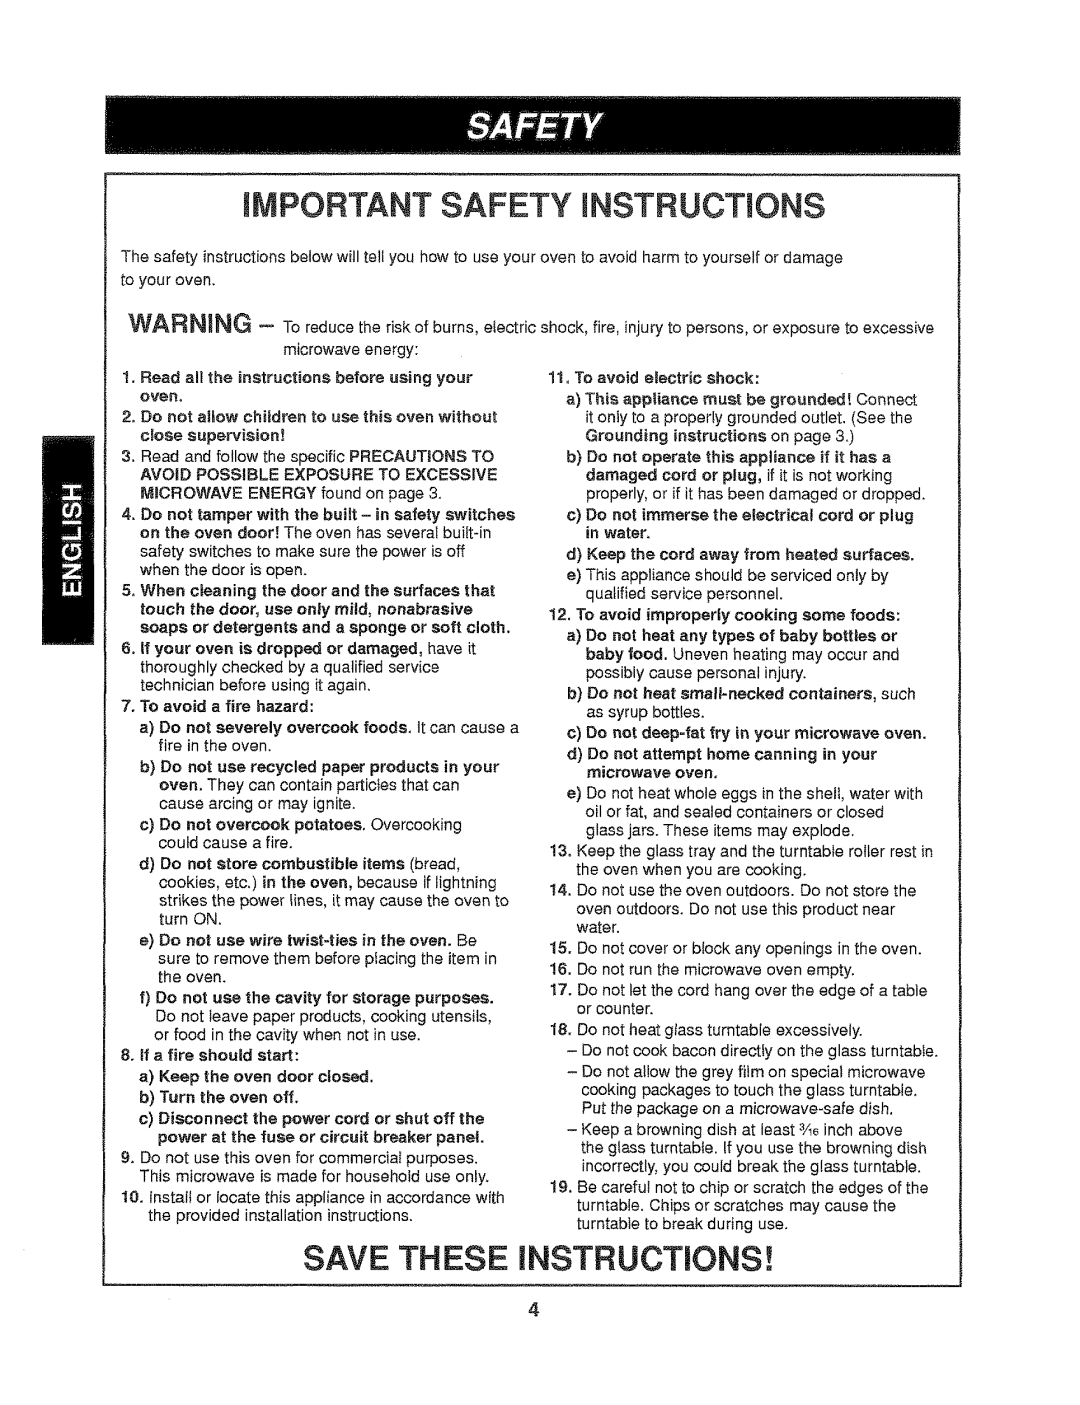 Kenmore 721.61289, 721.61282 manual iMPORTANT SAFETY MNSTRUCTIONS, Save These Instructions, to your oven, microwave energy 